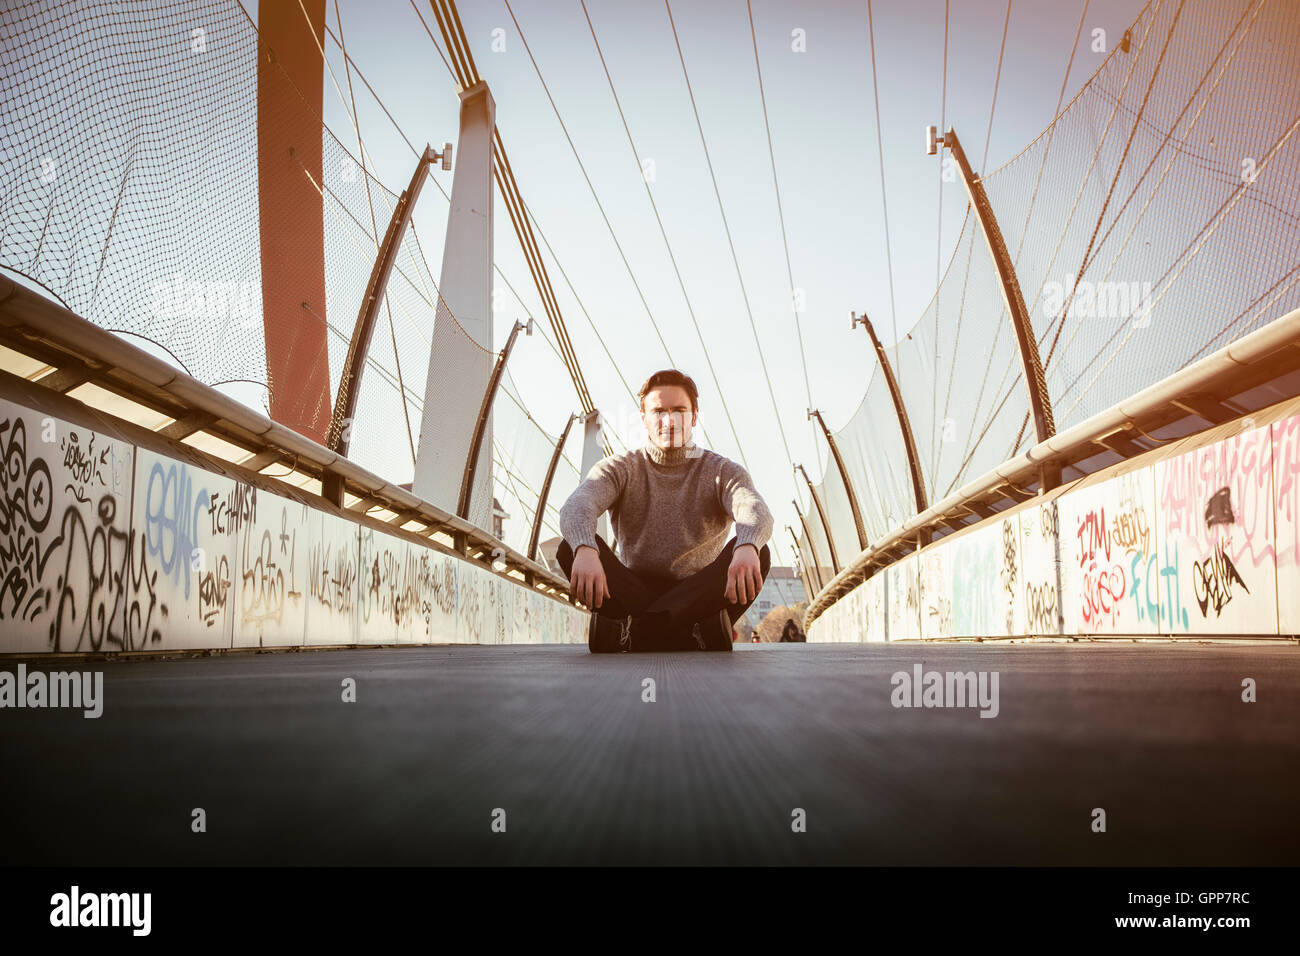 Handsome young man sitting outdoors in urban environment looking at camera, wearing winter clothes Stock Photo